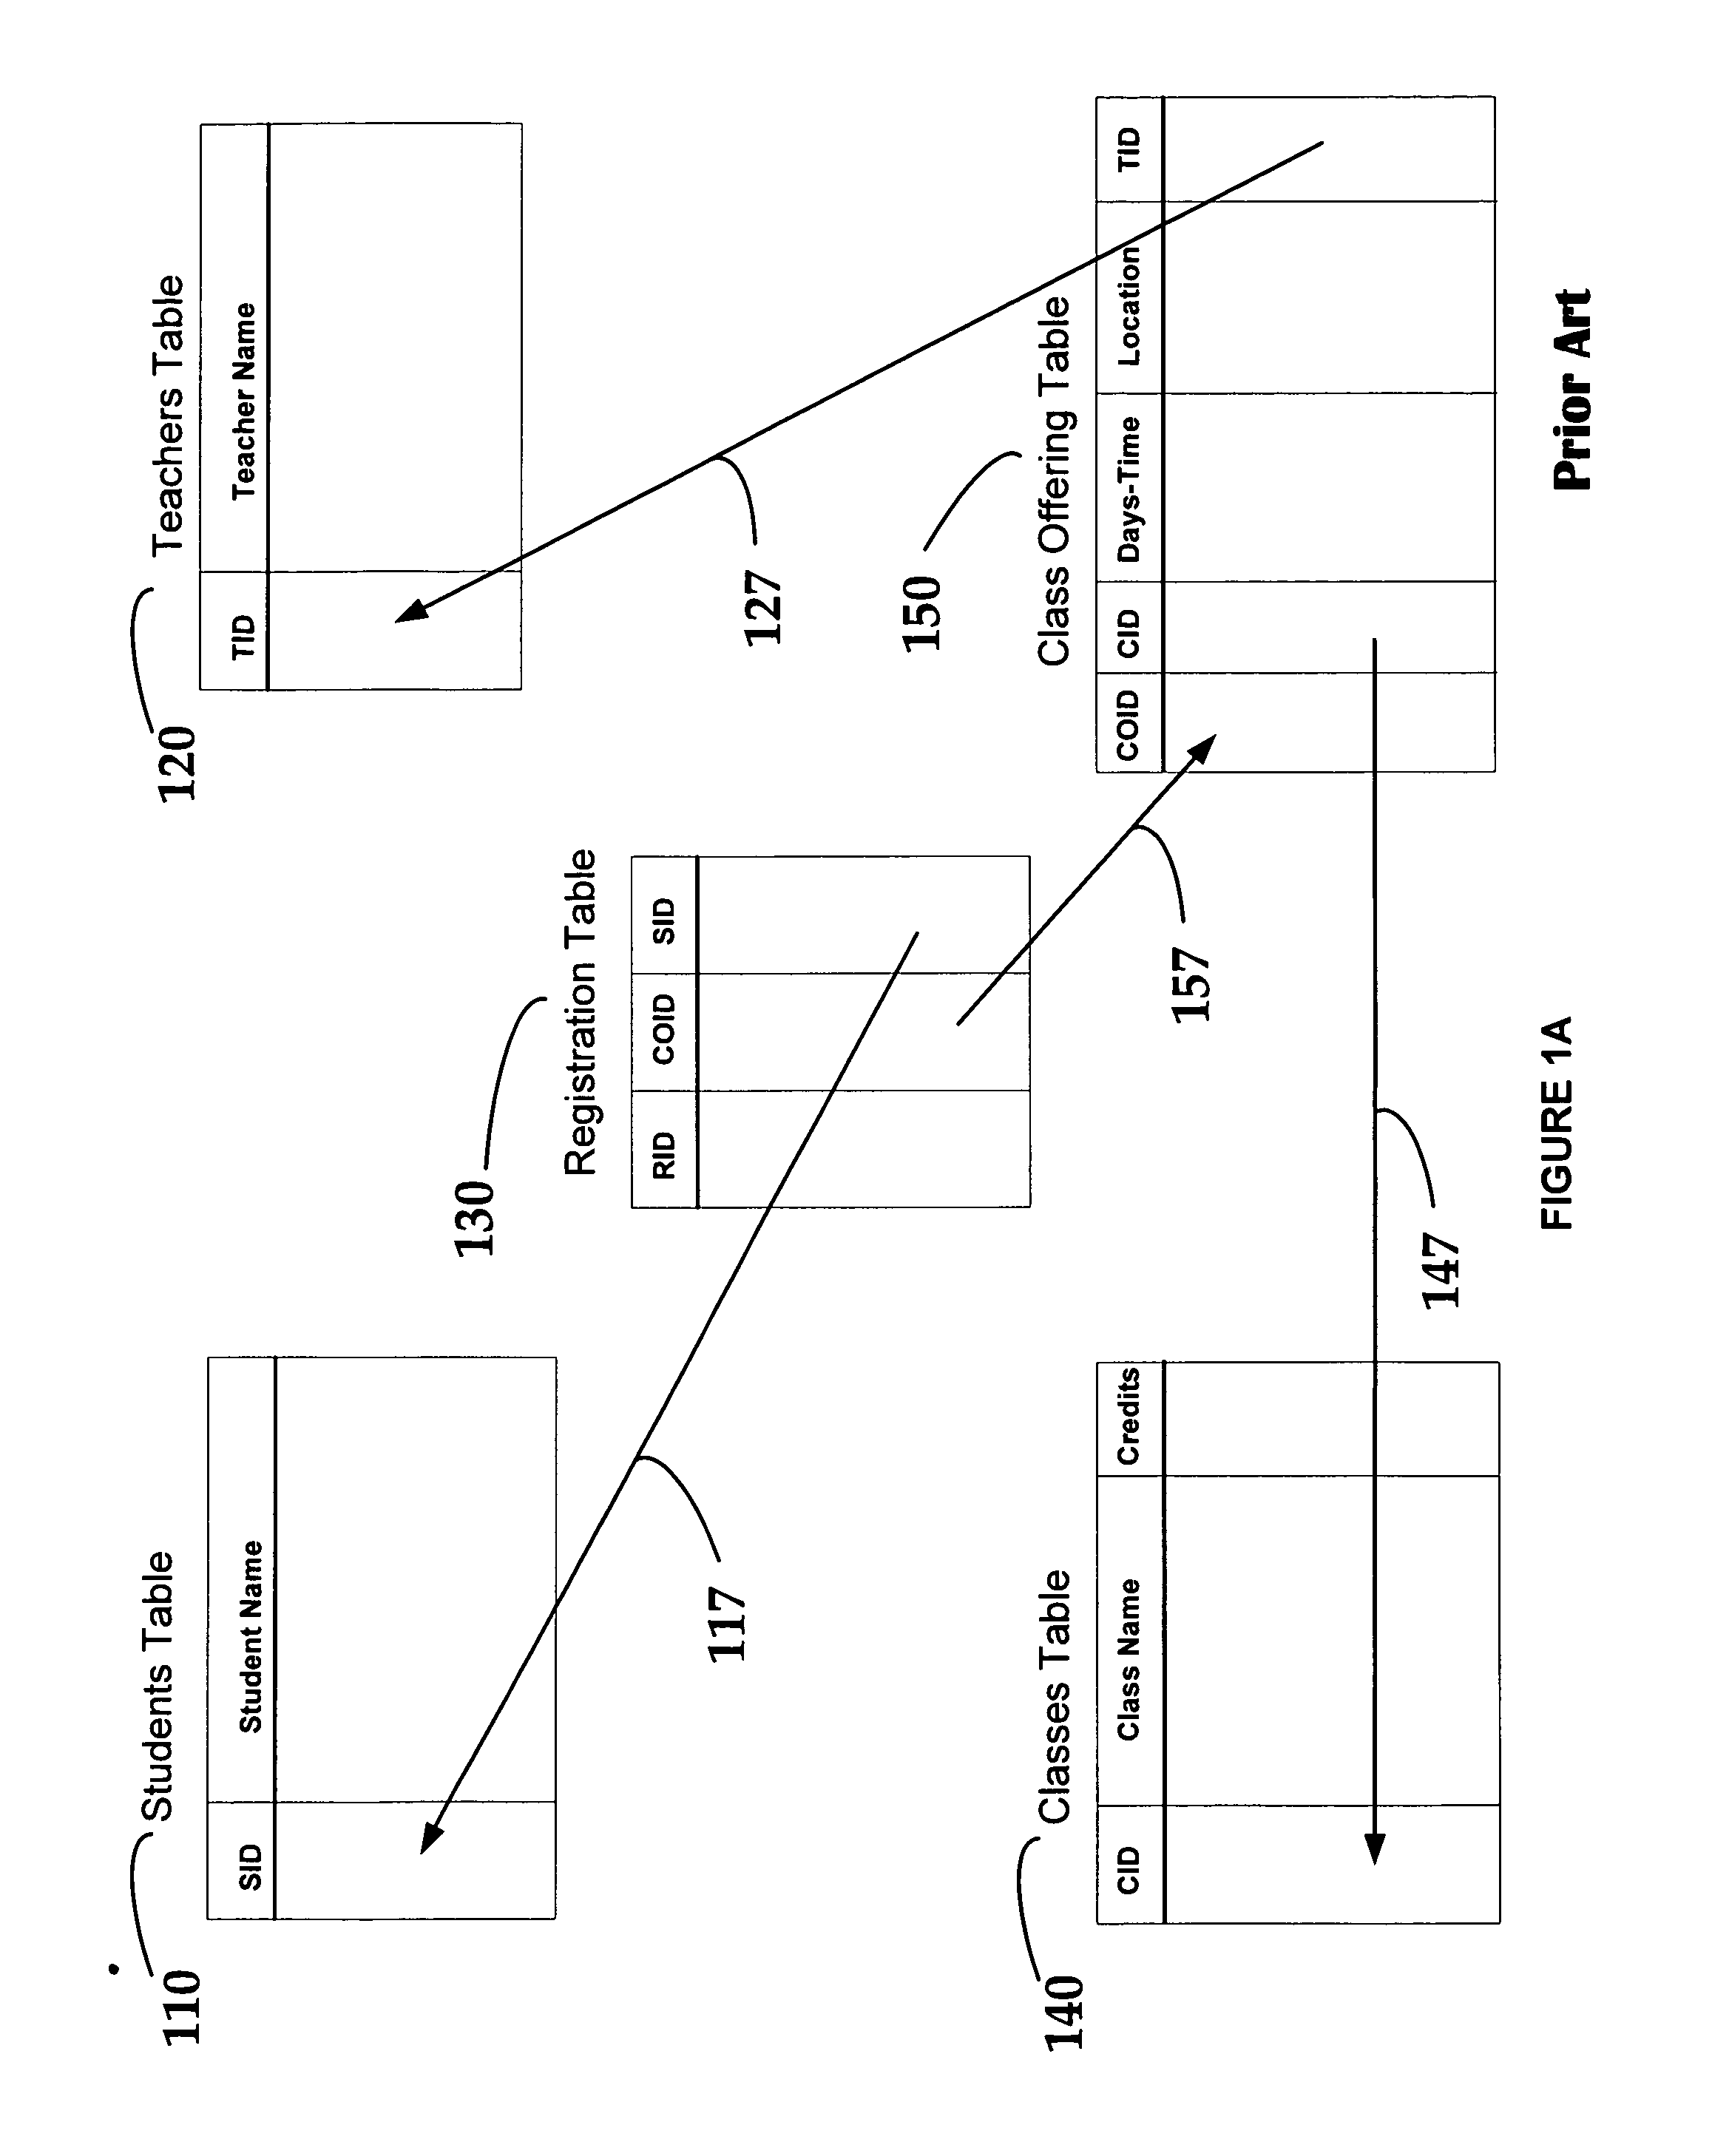 Method of representing an XML schema definition and data within a relational database management system using a reusable custom-defined nestable compound data type